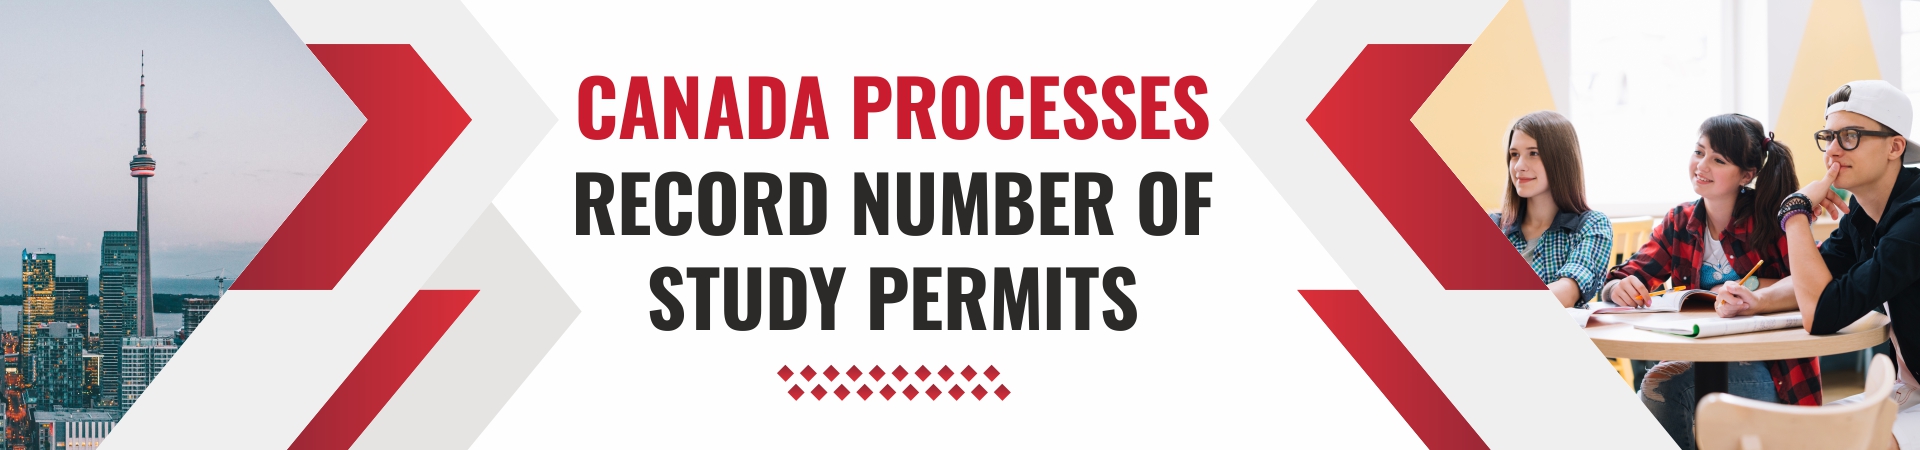 Canada processes record number of study permits